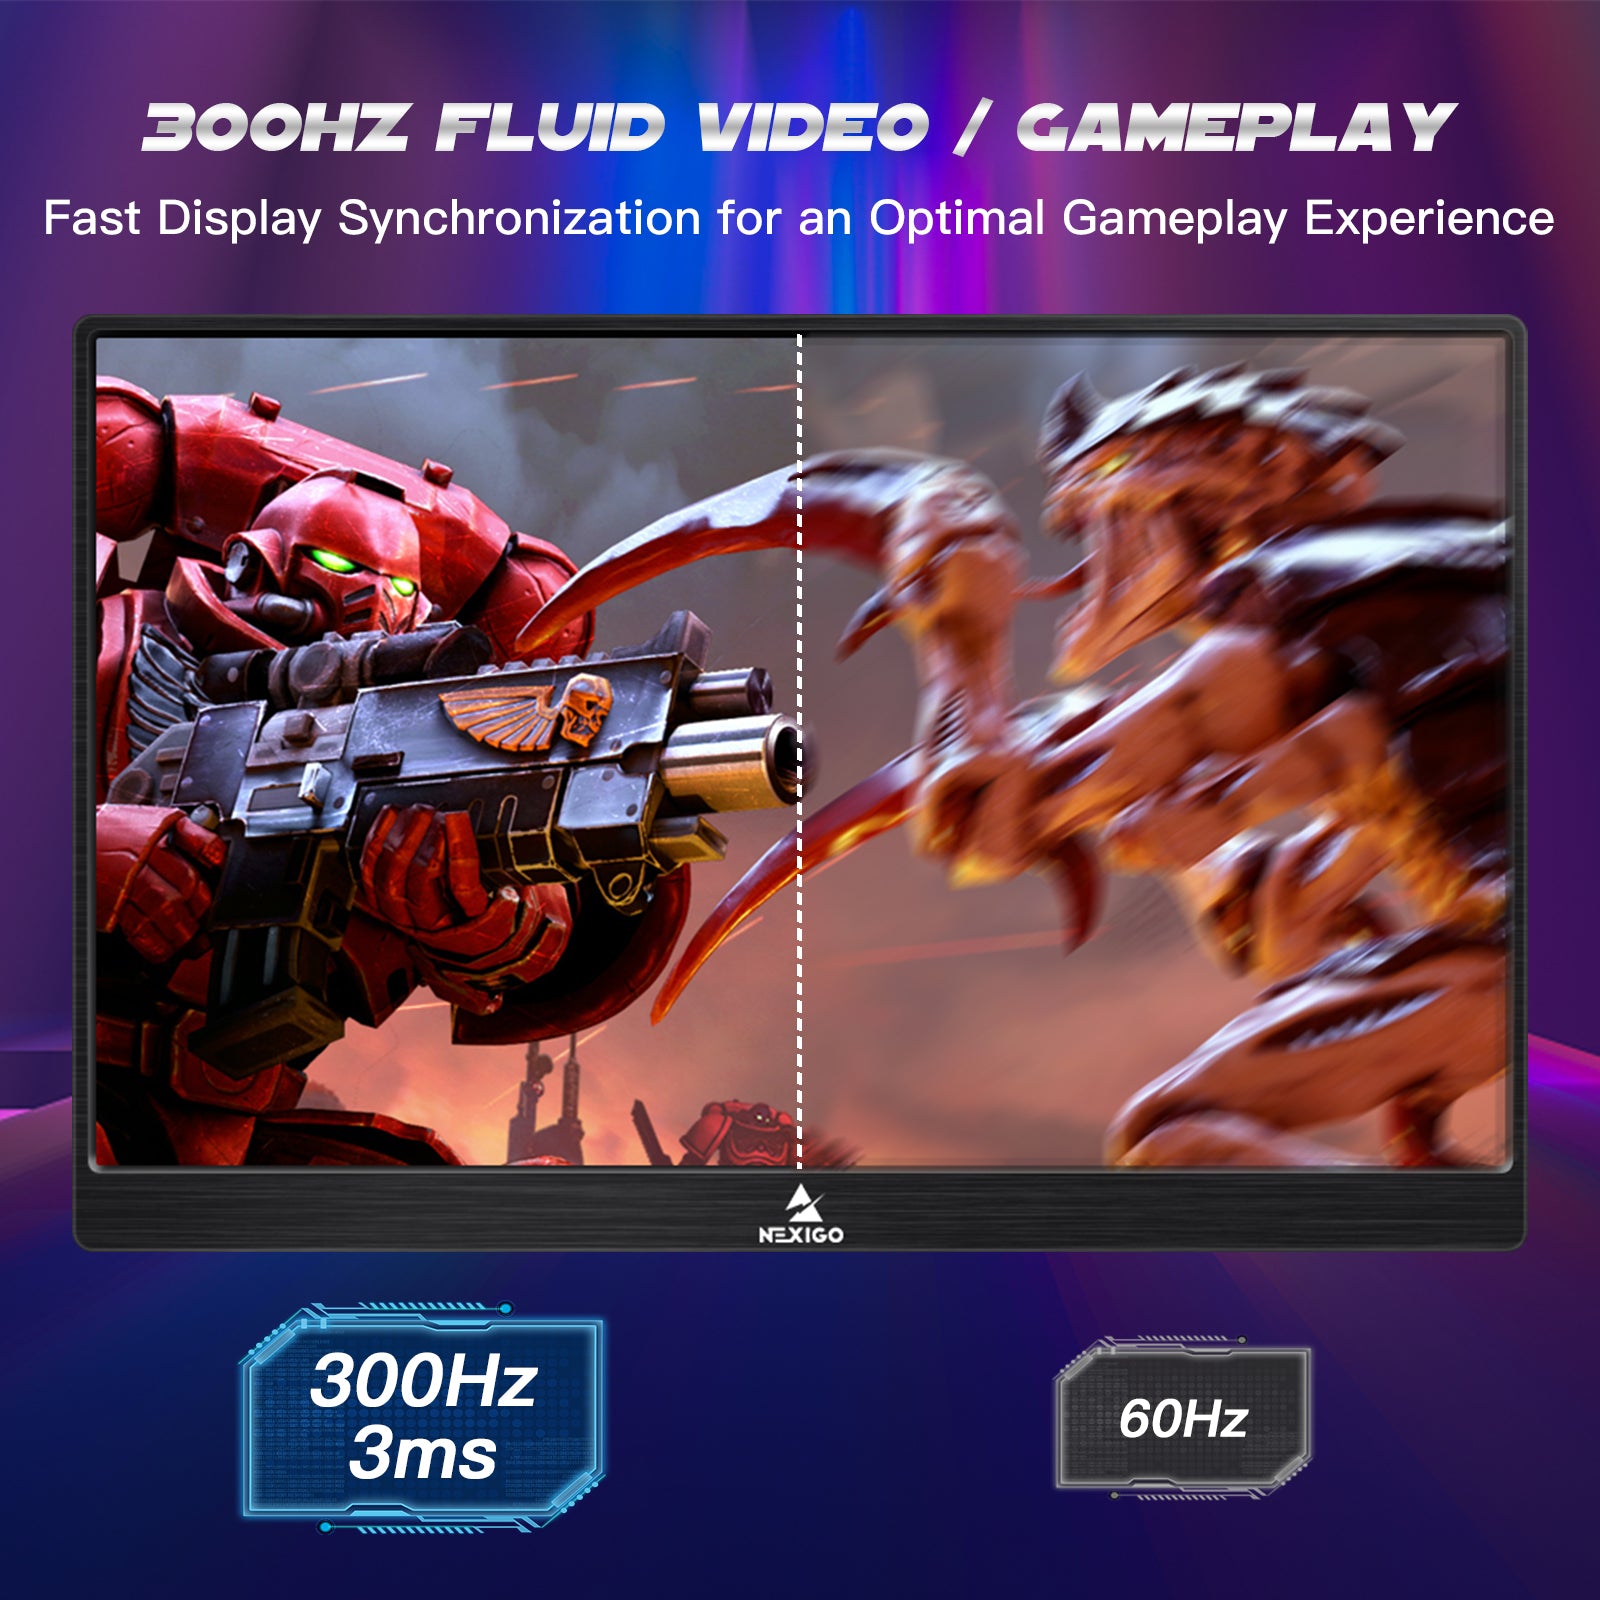 300Hz vs 60Hz: 300Hz is faster and smoother data synchronization for an optimal gameplay experience